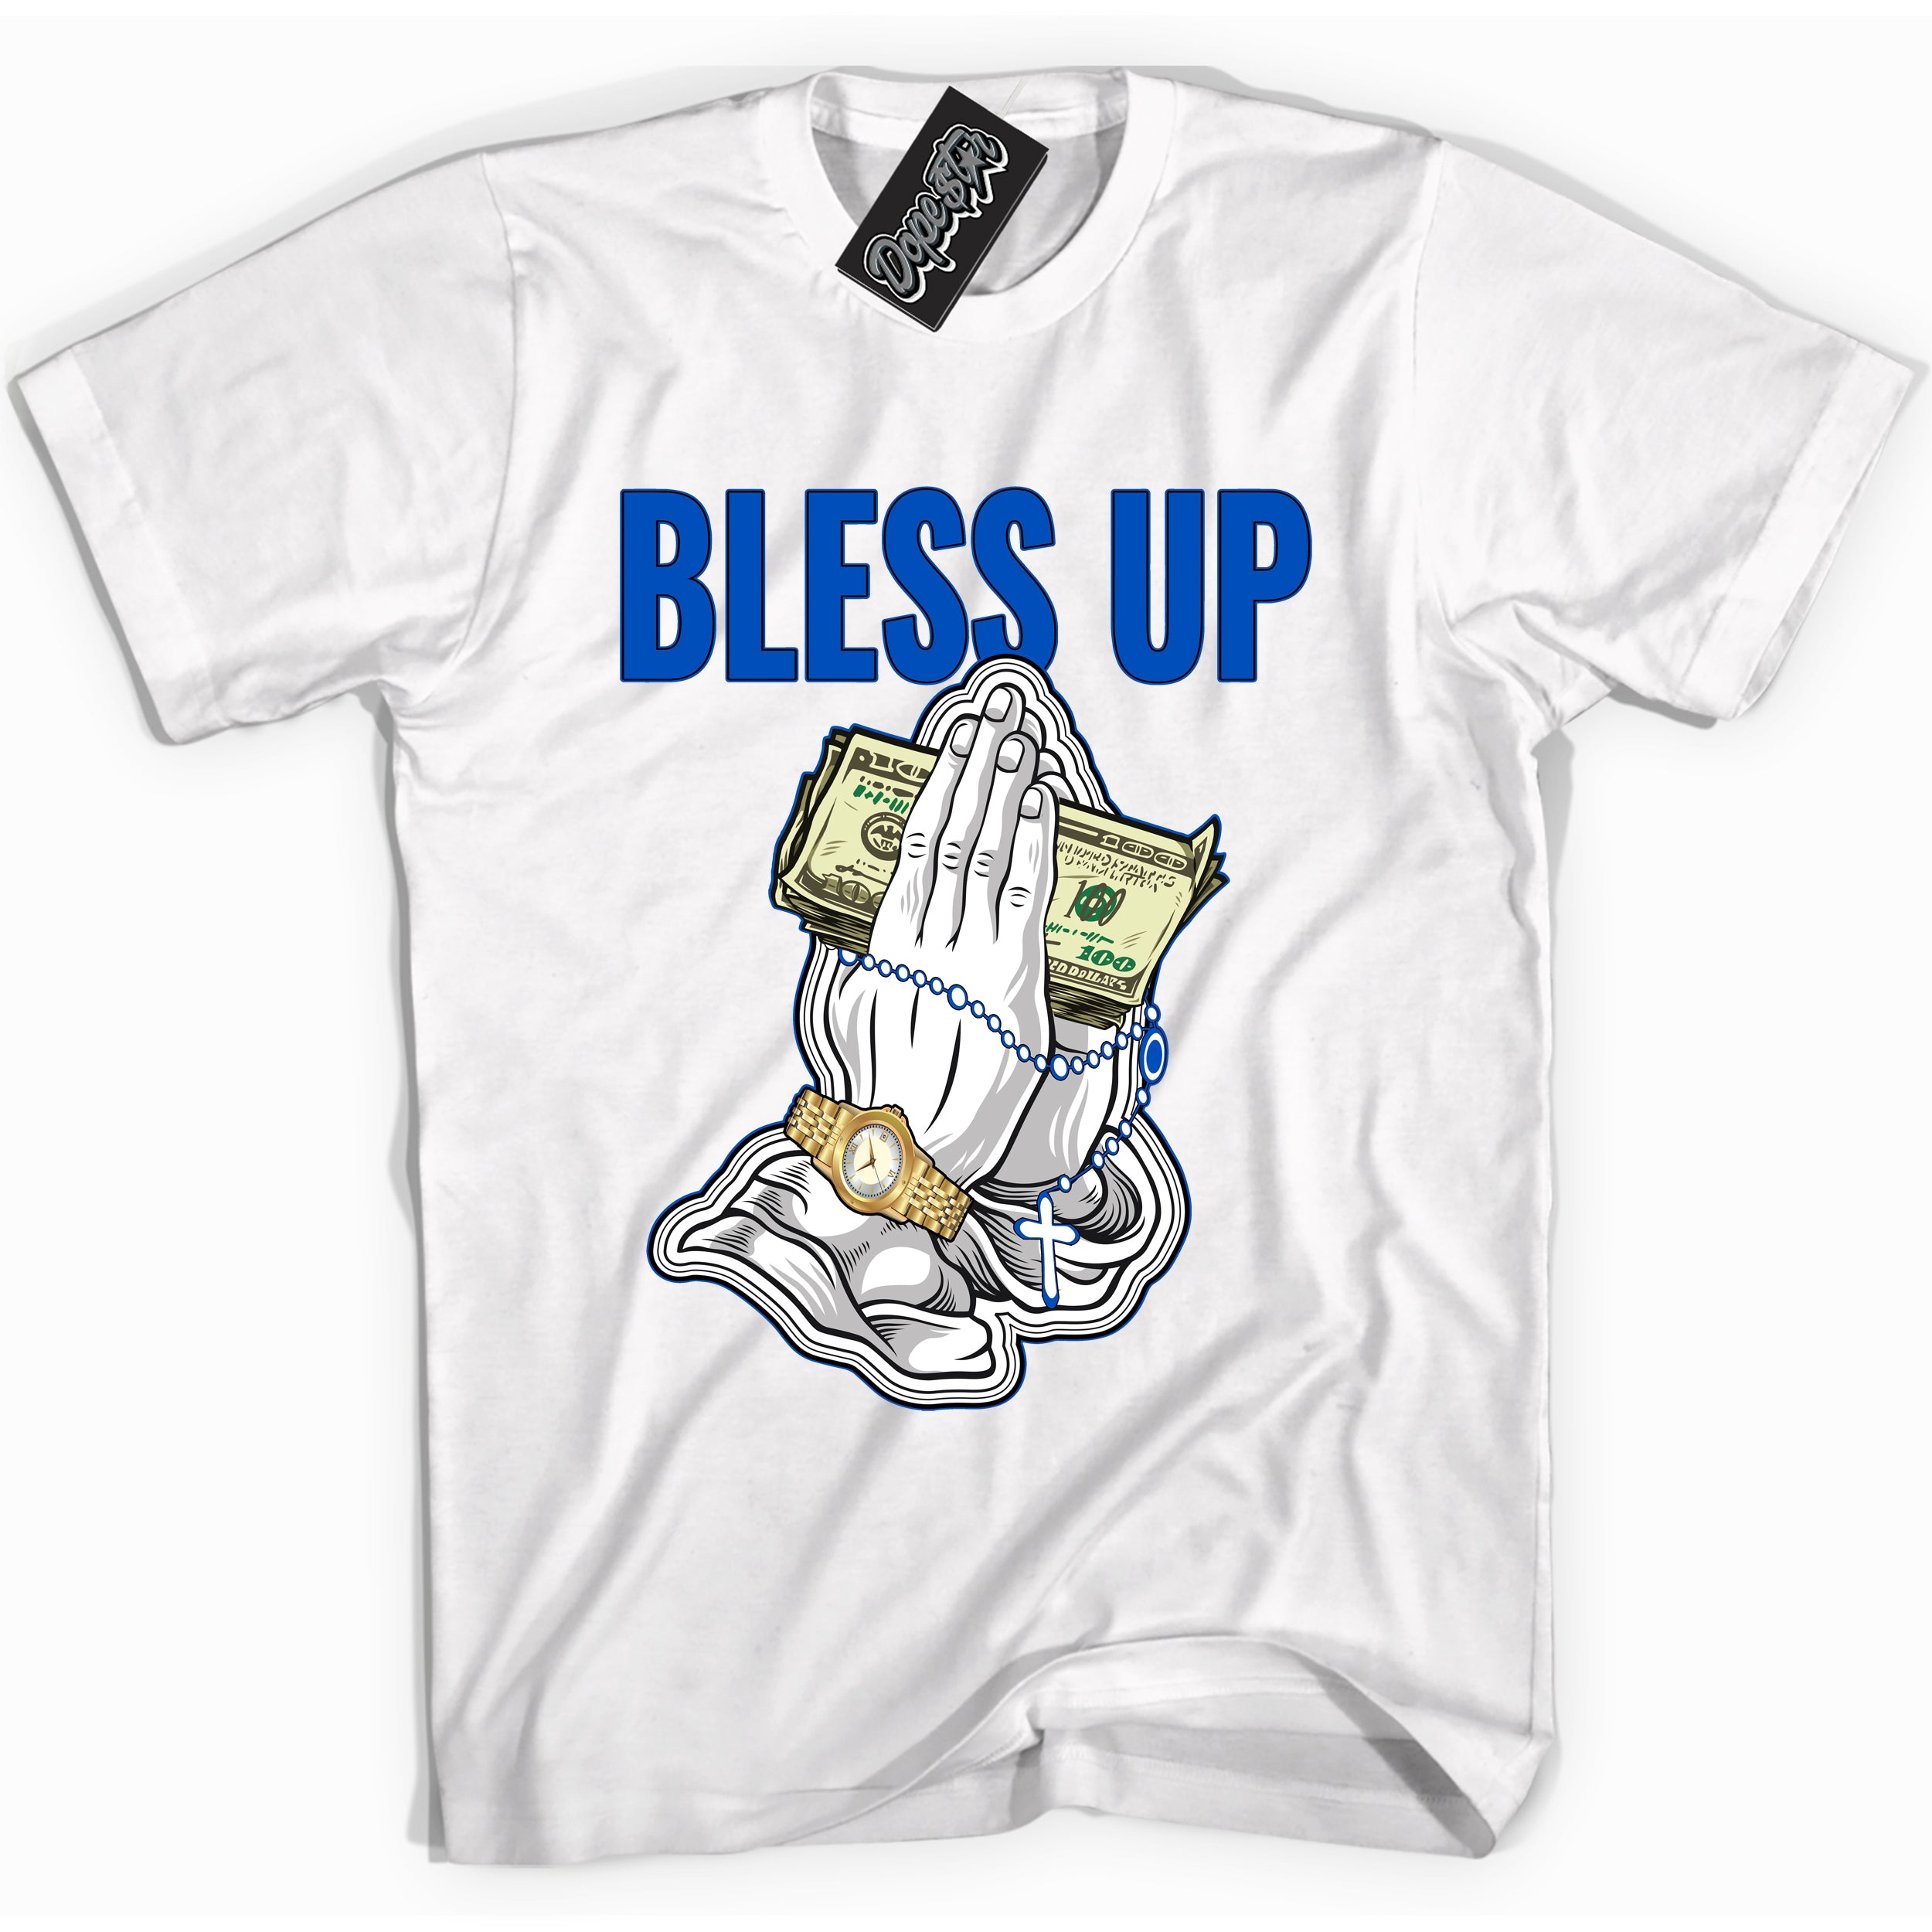 Cool White graphic tee with "Bless Up" design, that perfectly matches Royal Reimagined 1s sneakers 